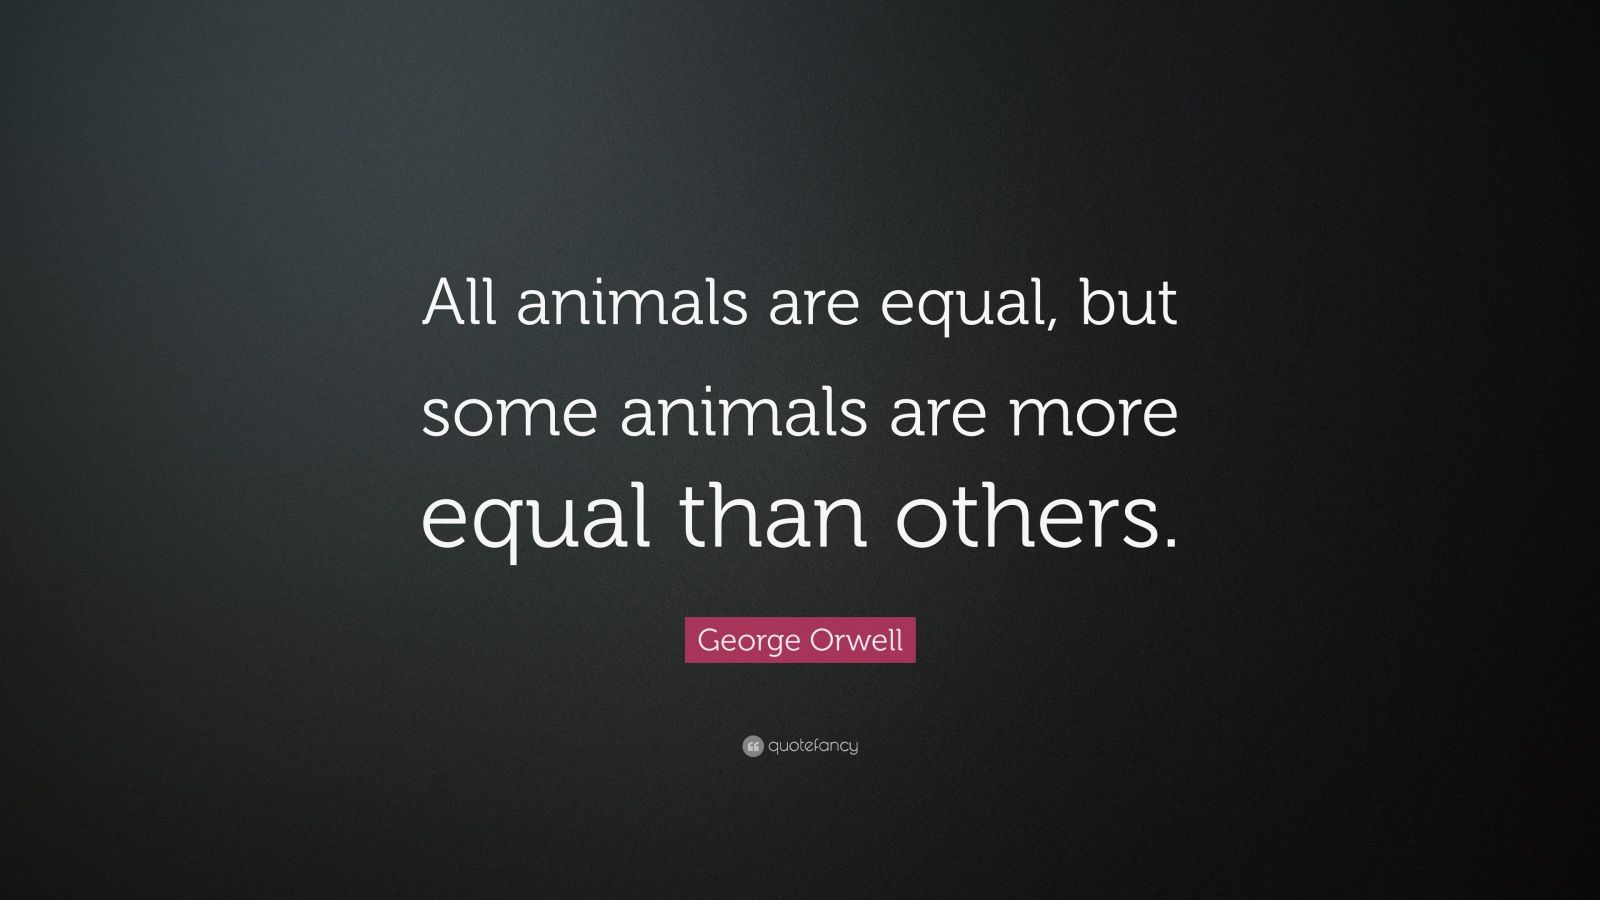 George Orwell Quote: All animals are equal but some animals are more